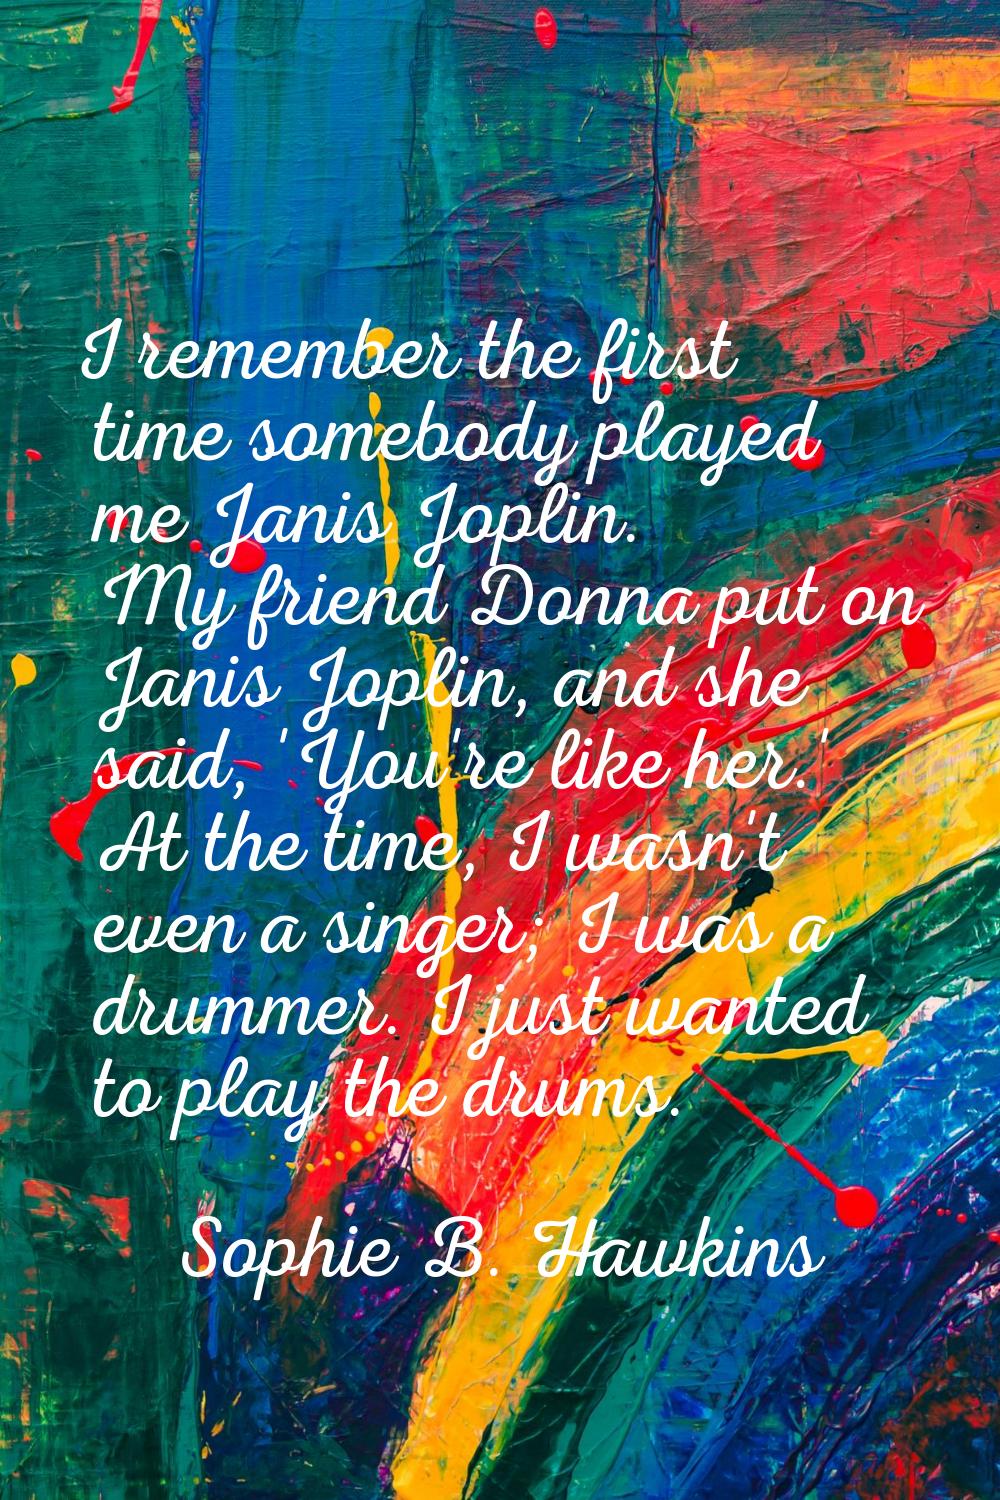 I remember the first time somebody played me Janis Joplin. My friend Donna put on Janis Joplin, and